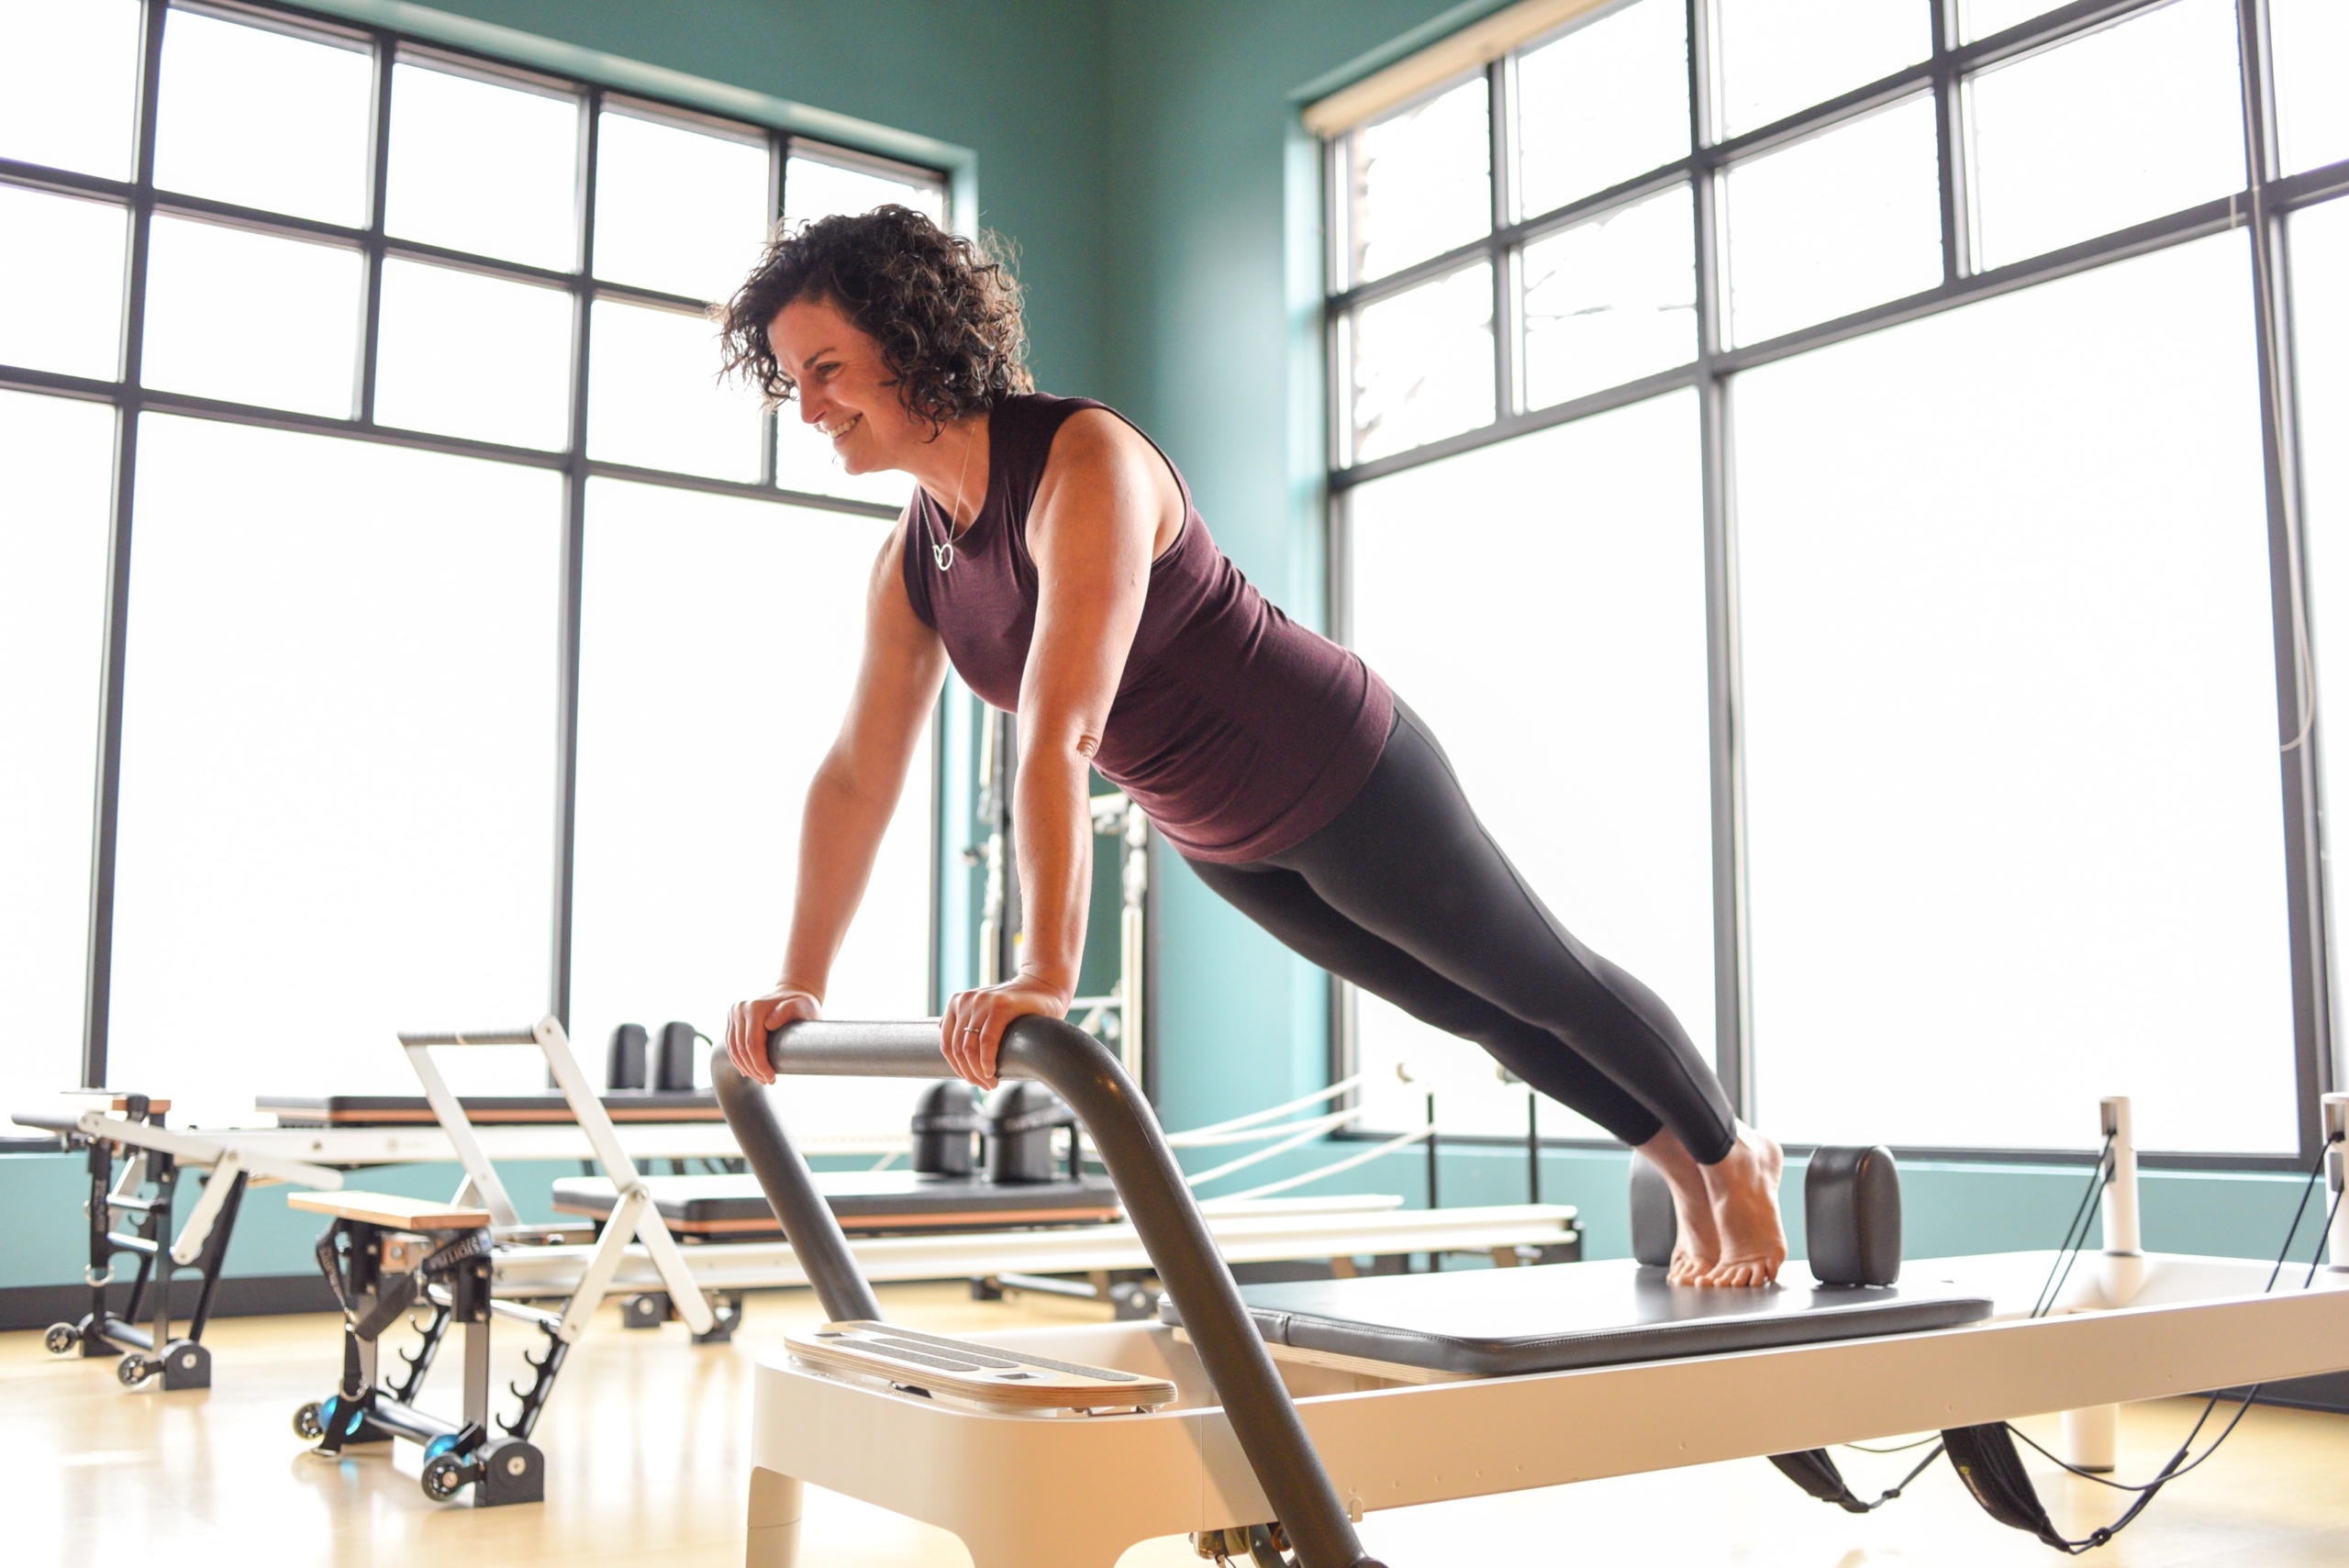 Why did you decide to become Pilates instructors?